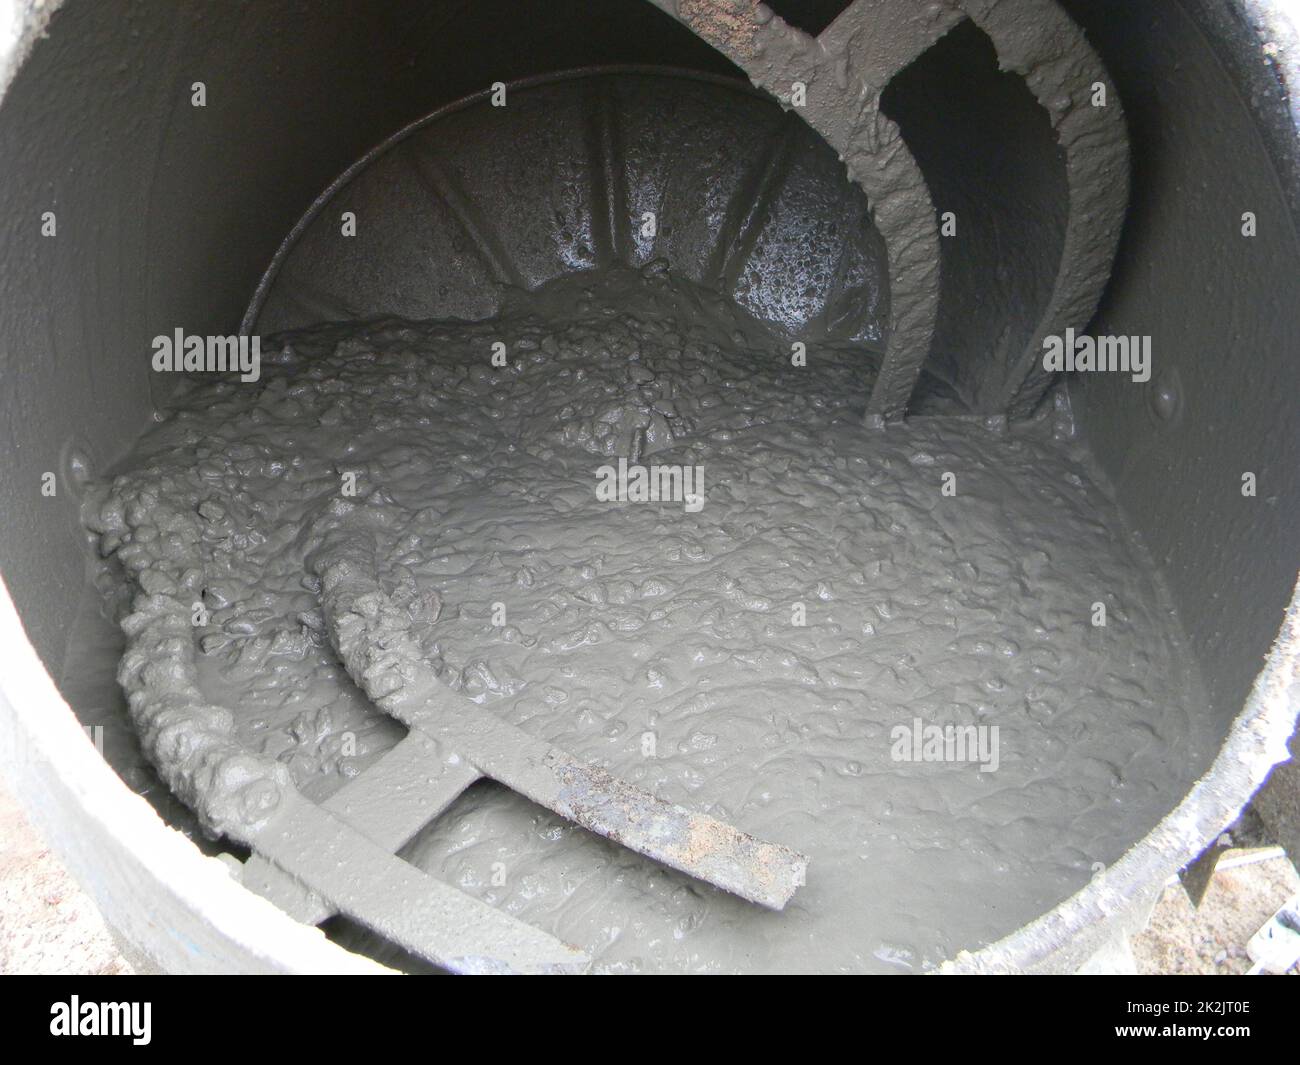 Concrete mixer with pouring cement. Close up on concrete mixer, cement mortar mixing. Stock Photo